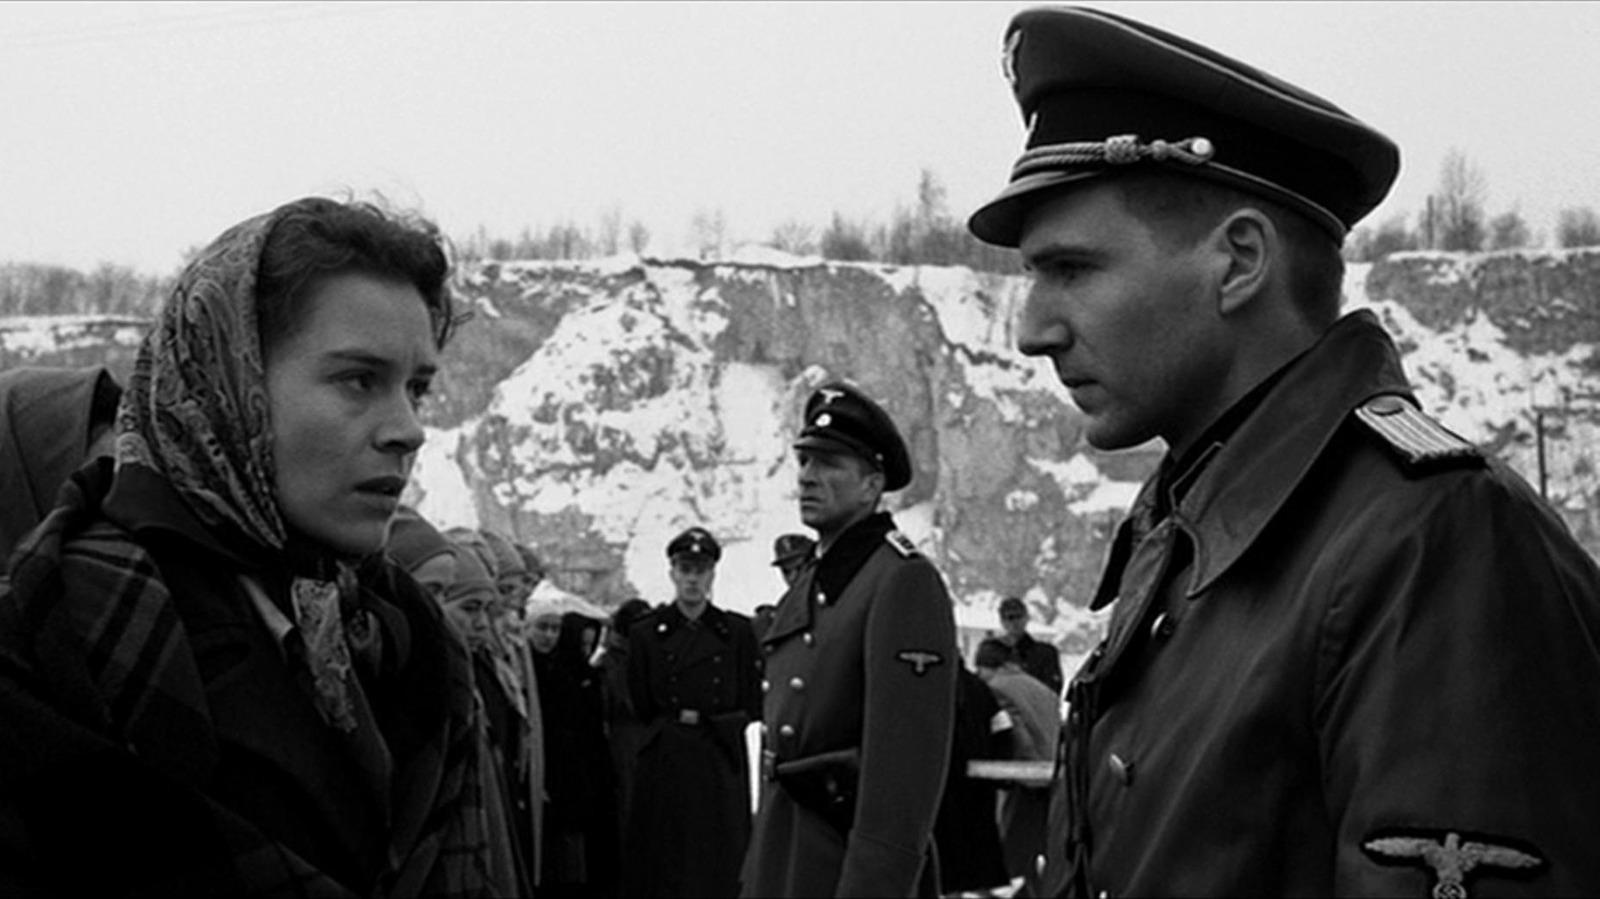 #Ralph Fiennes Paid A Big Price While Preparing For His Schindler’s List Role